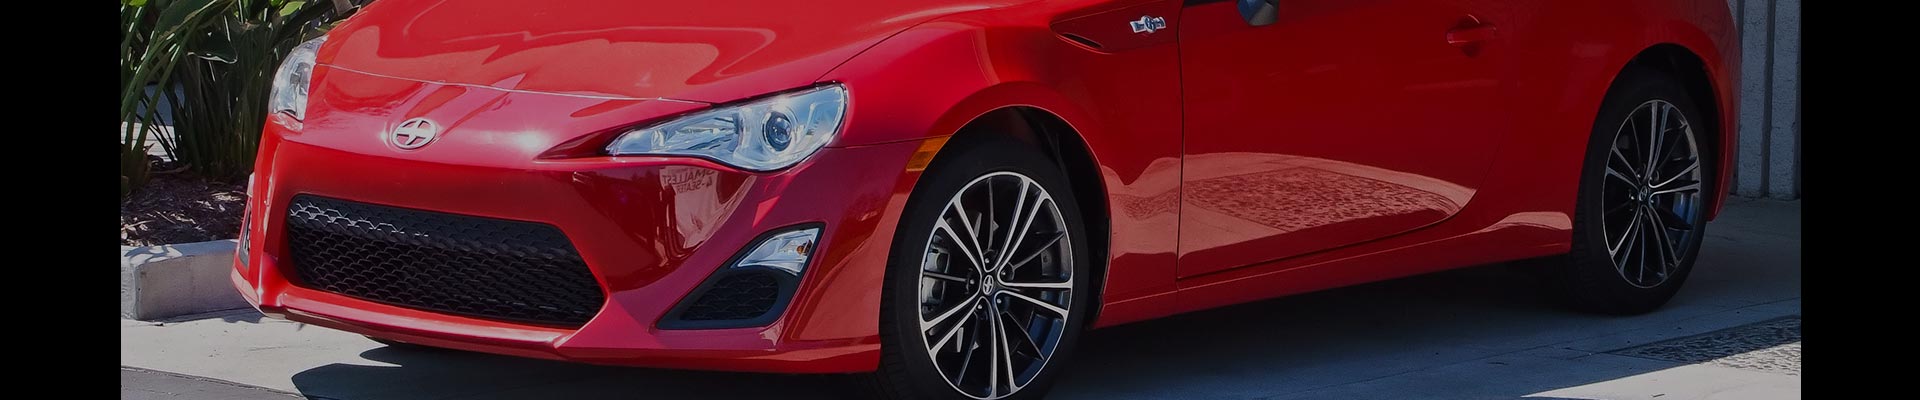 Shop Replacement and OEM 2014 Scion FR-S Parts with Discounted Price on the Net